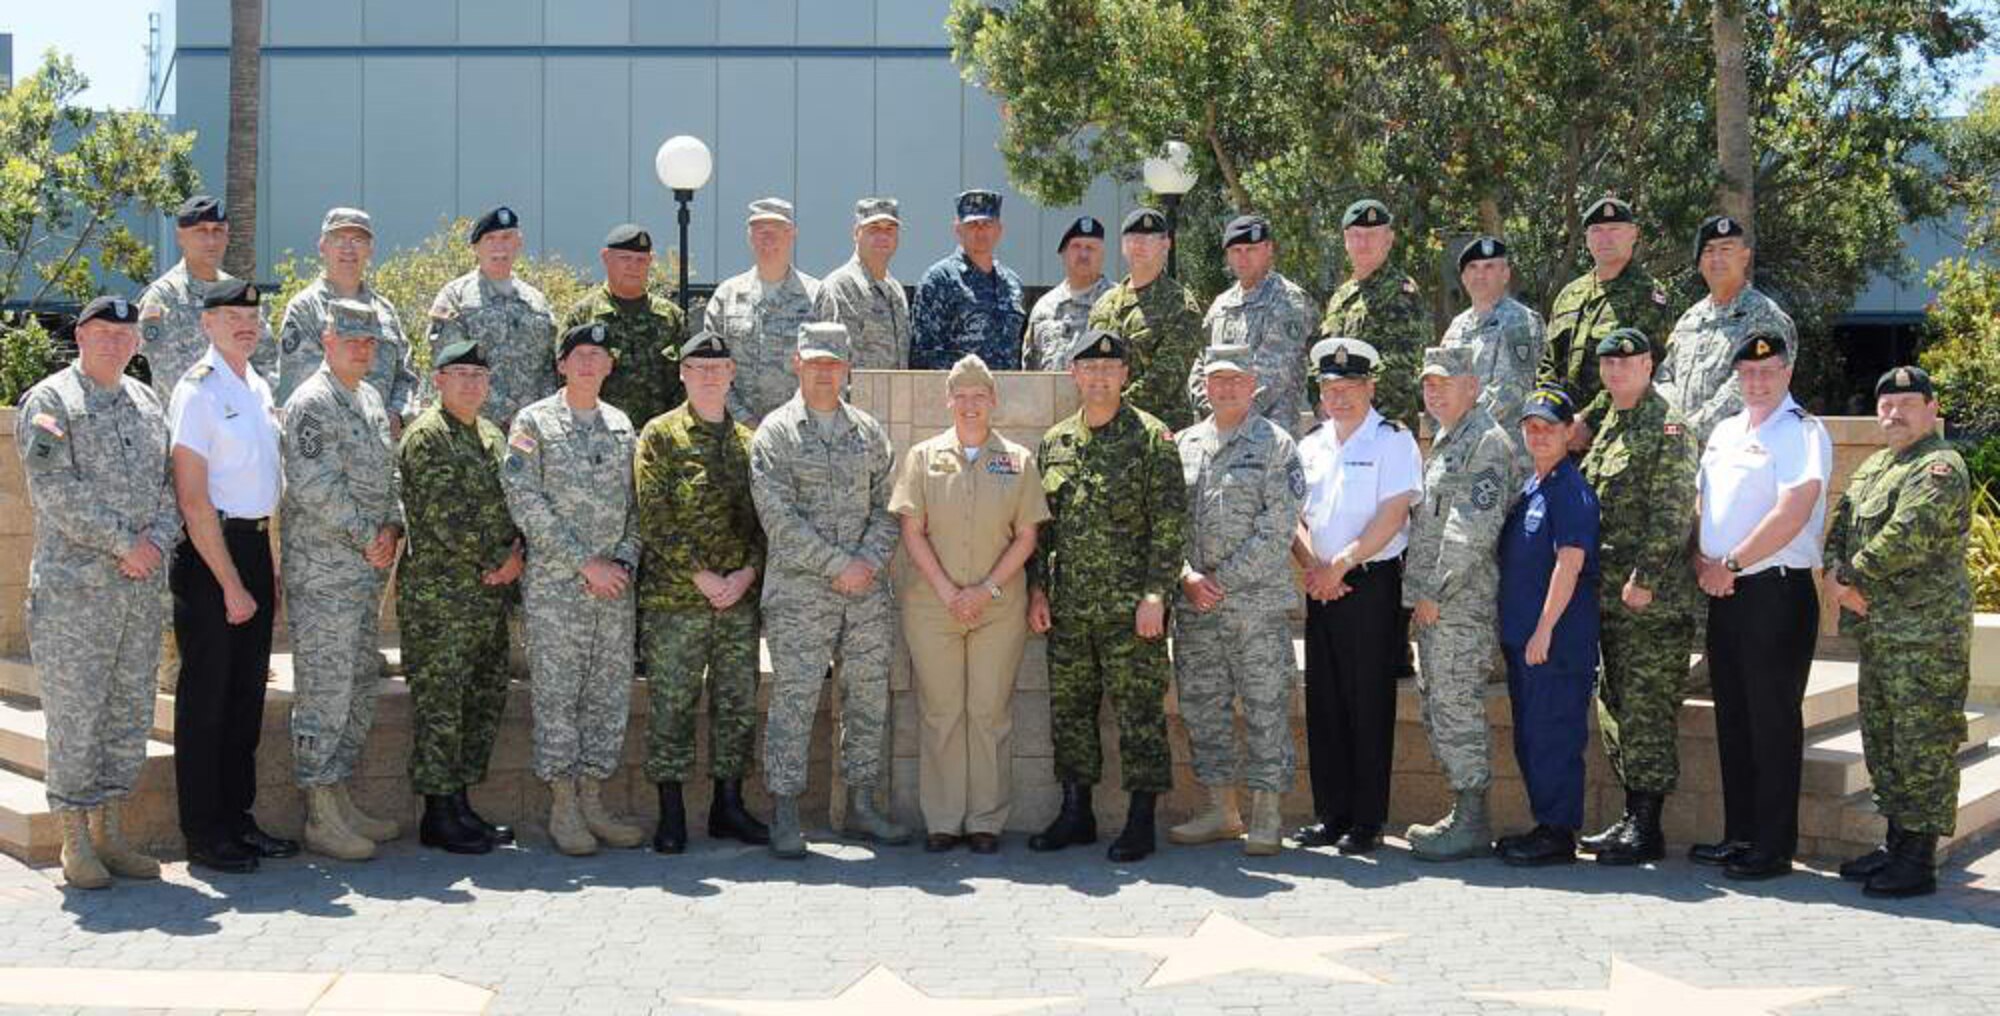 Senior Enlisted Leaders from U.S. Northern Command and Canada Command gather at the Headquarters for the U.S. Navy’s Third Fleet in San Diego June 1. The senior leaders were in San Diego for the North American Border Conference, which focused on topics such as border security, joint and international activities and training. (Courtesy photo)